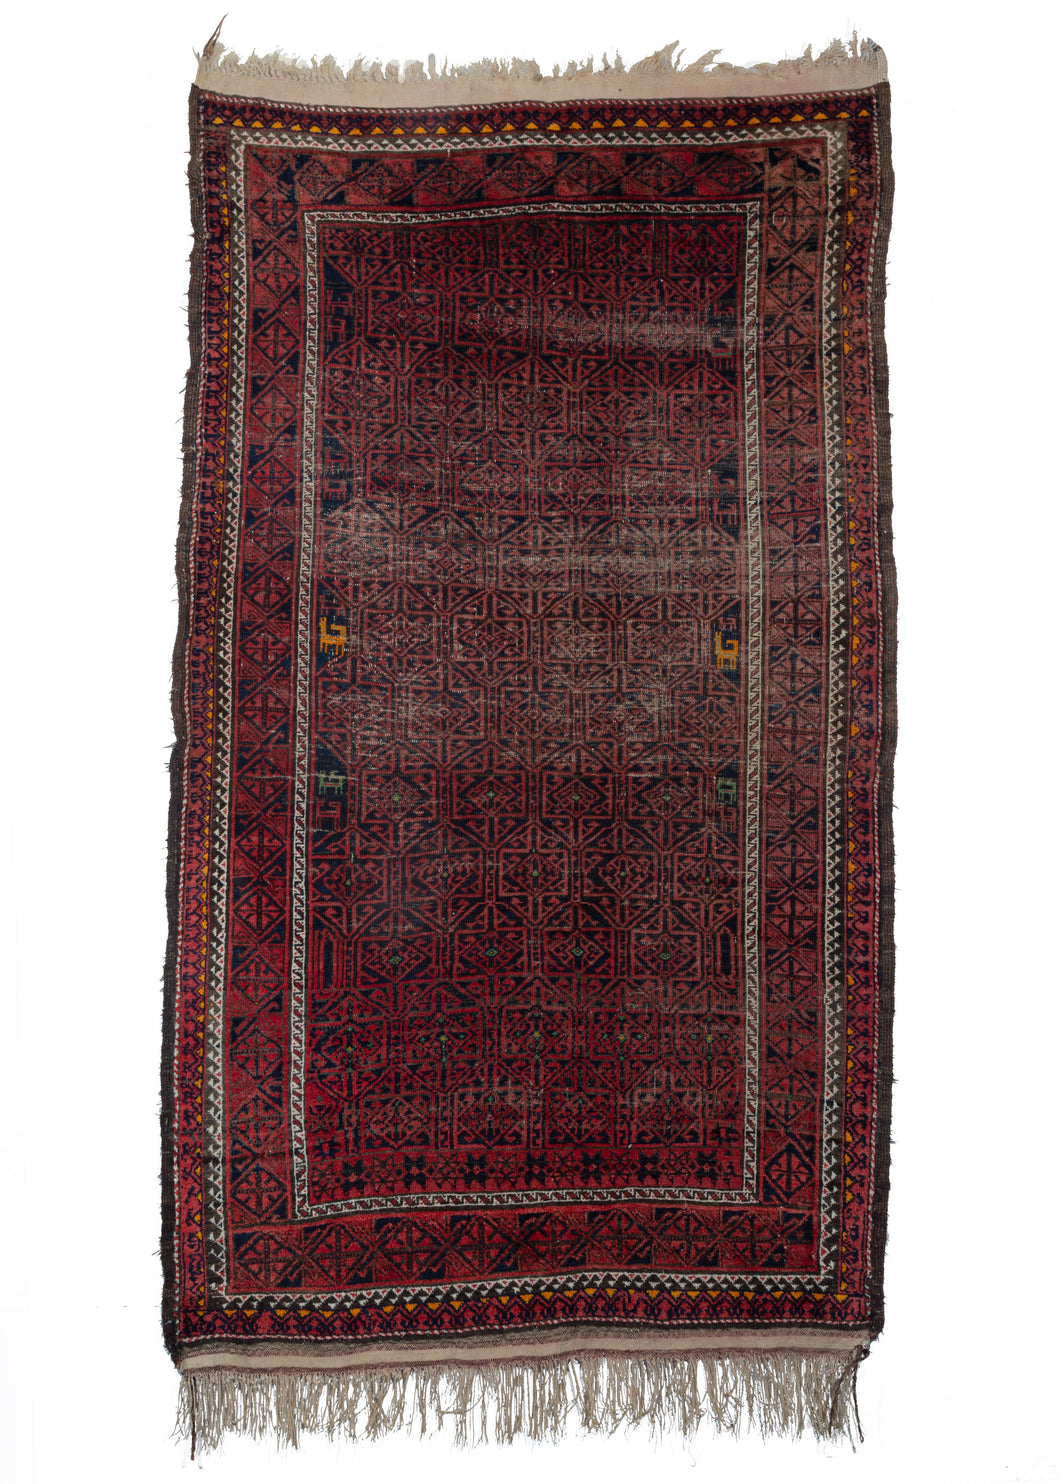 Mid Century Afghani Baluch Area Rug with bright red design on black field and little animals in orange and green